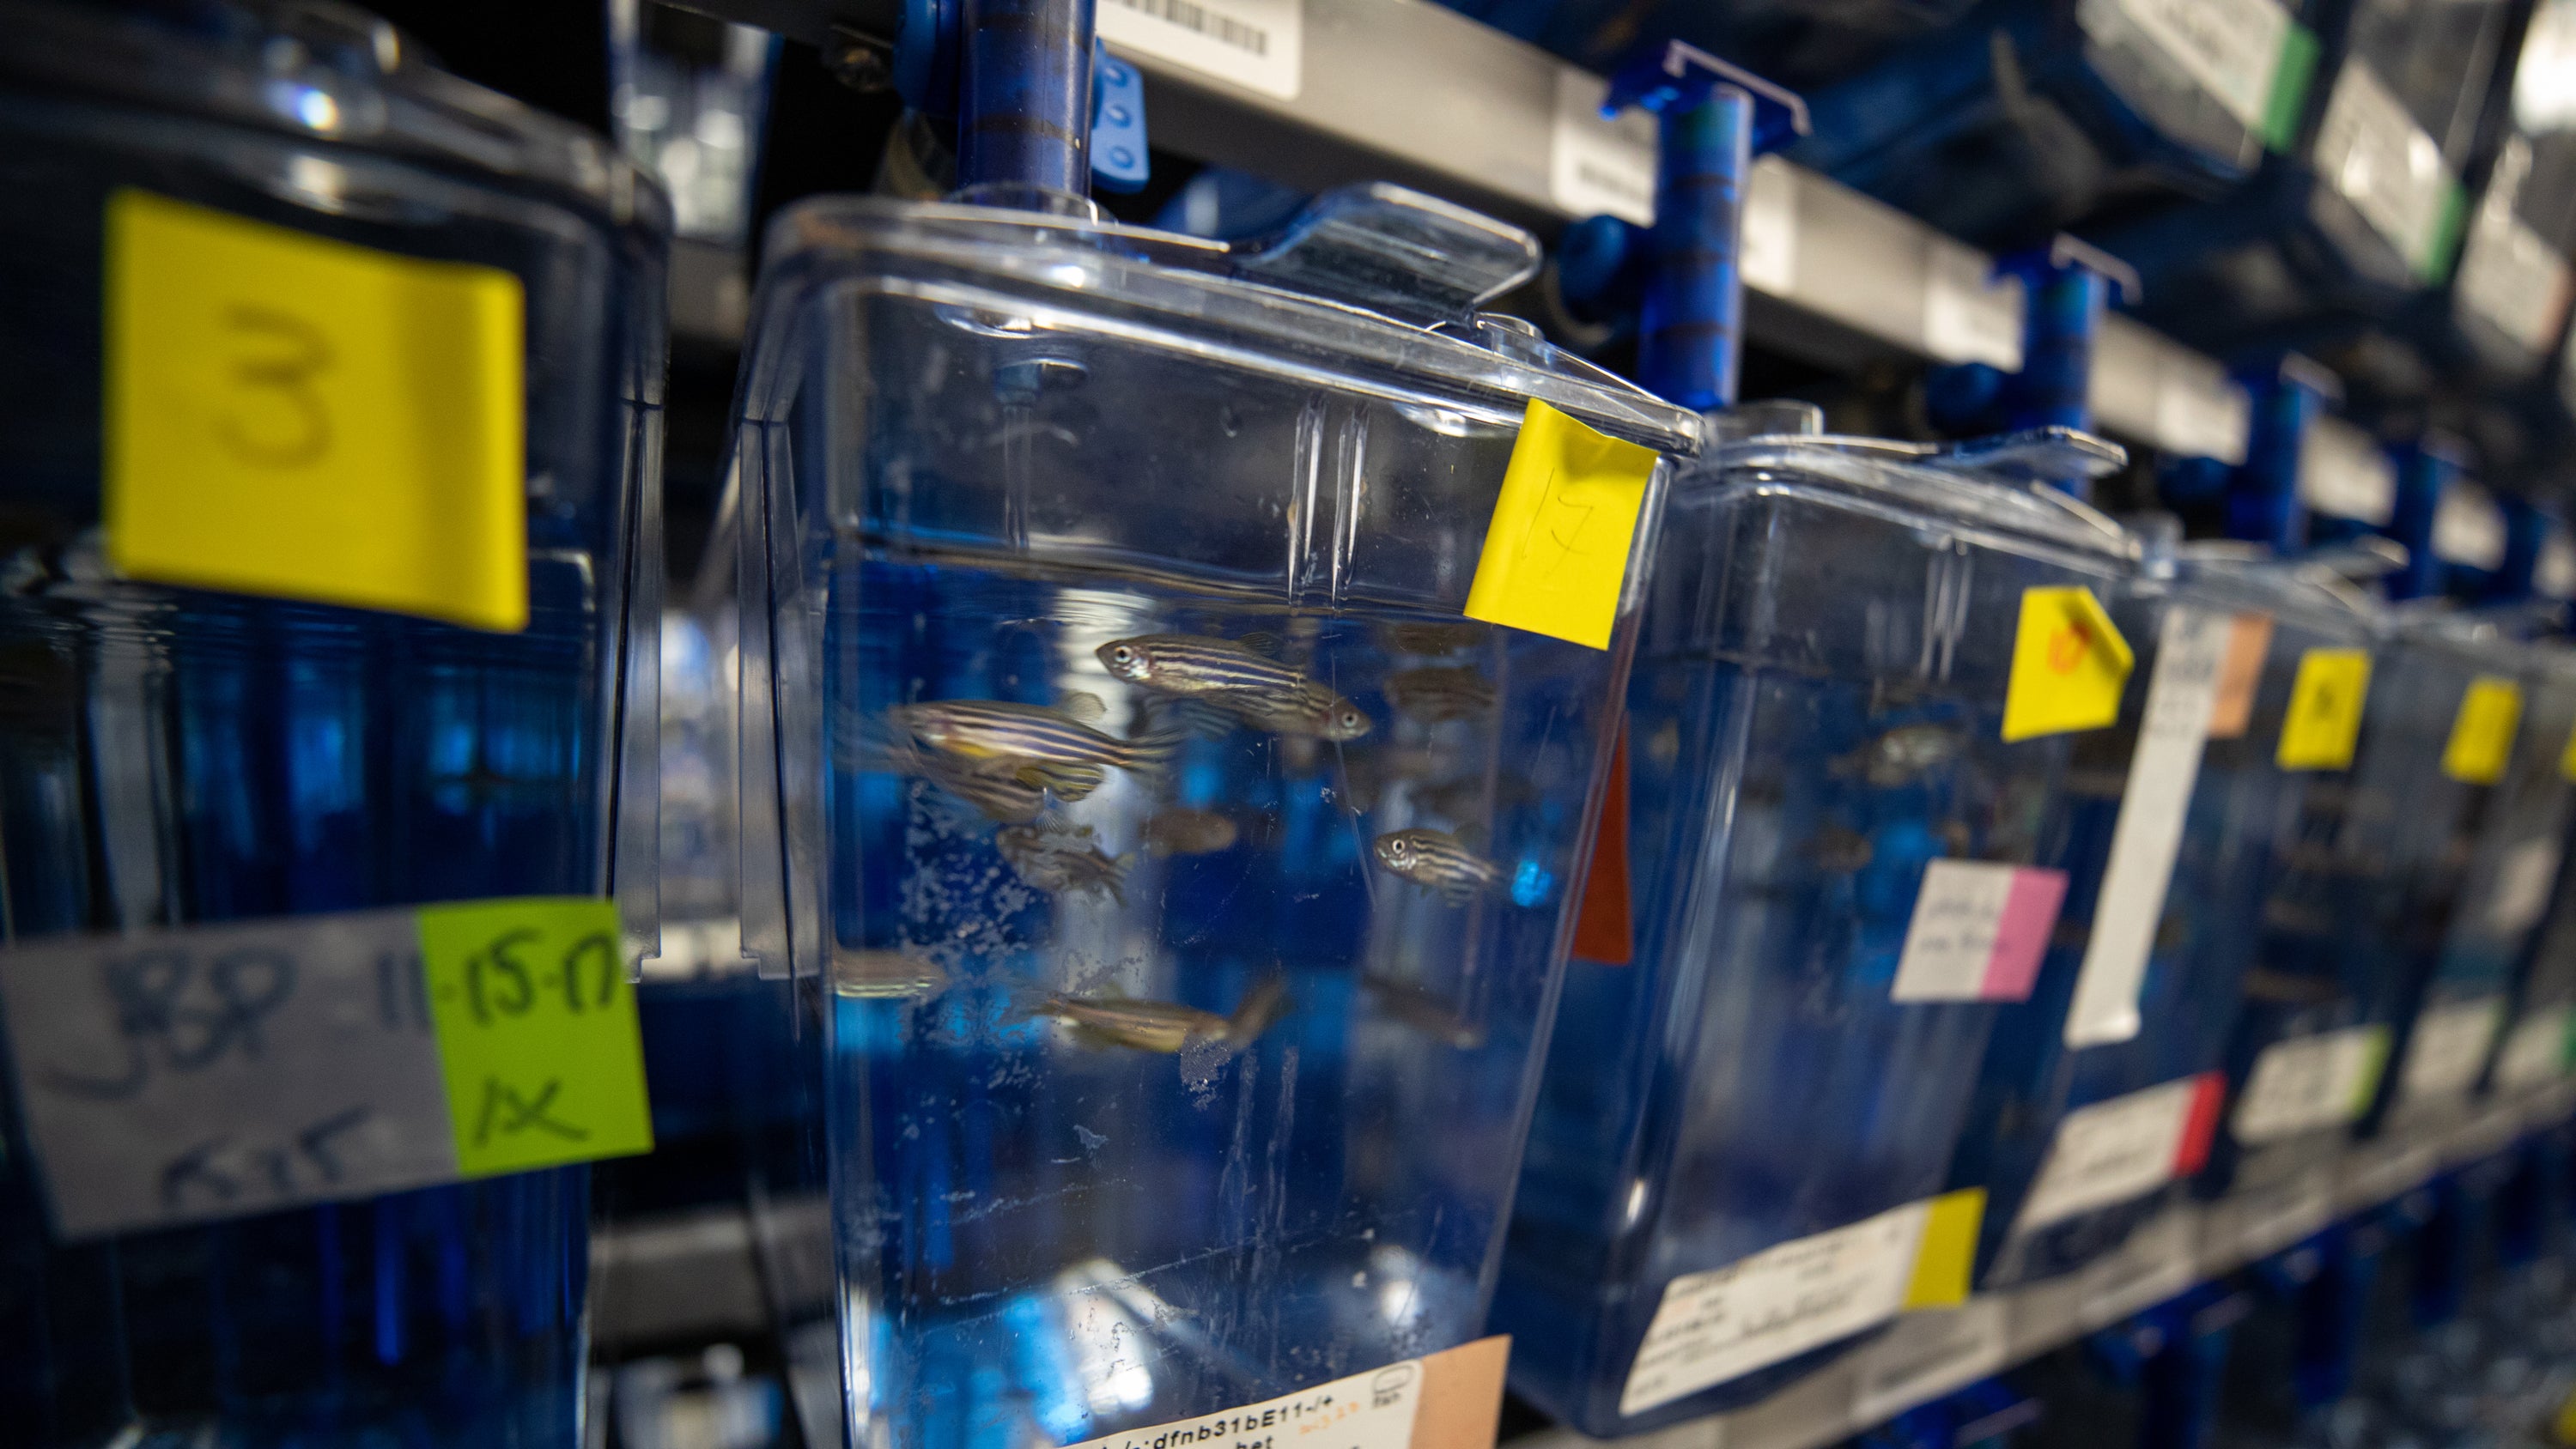 Image of zebrafish in tanks with labels